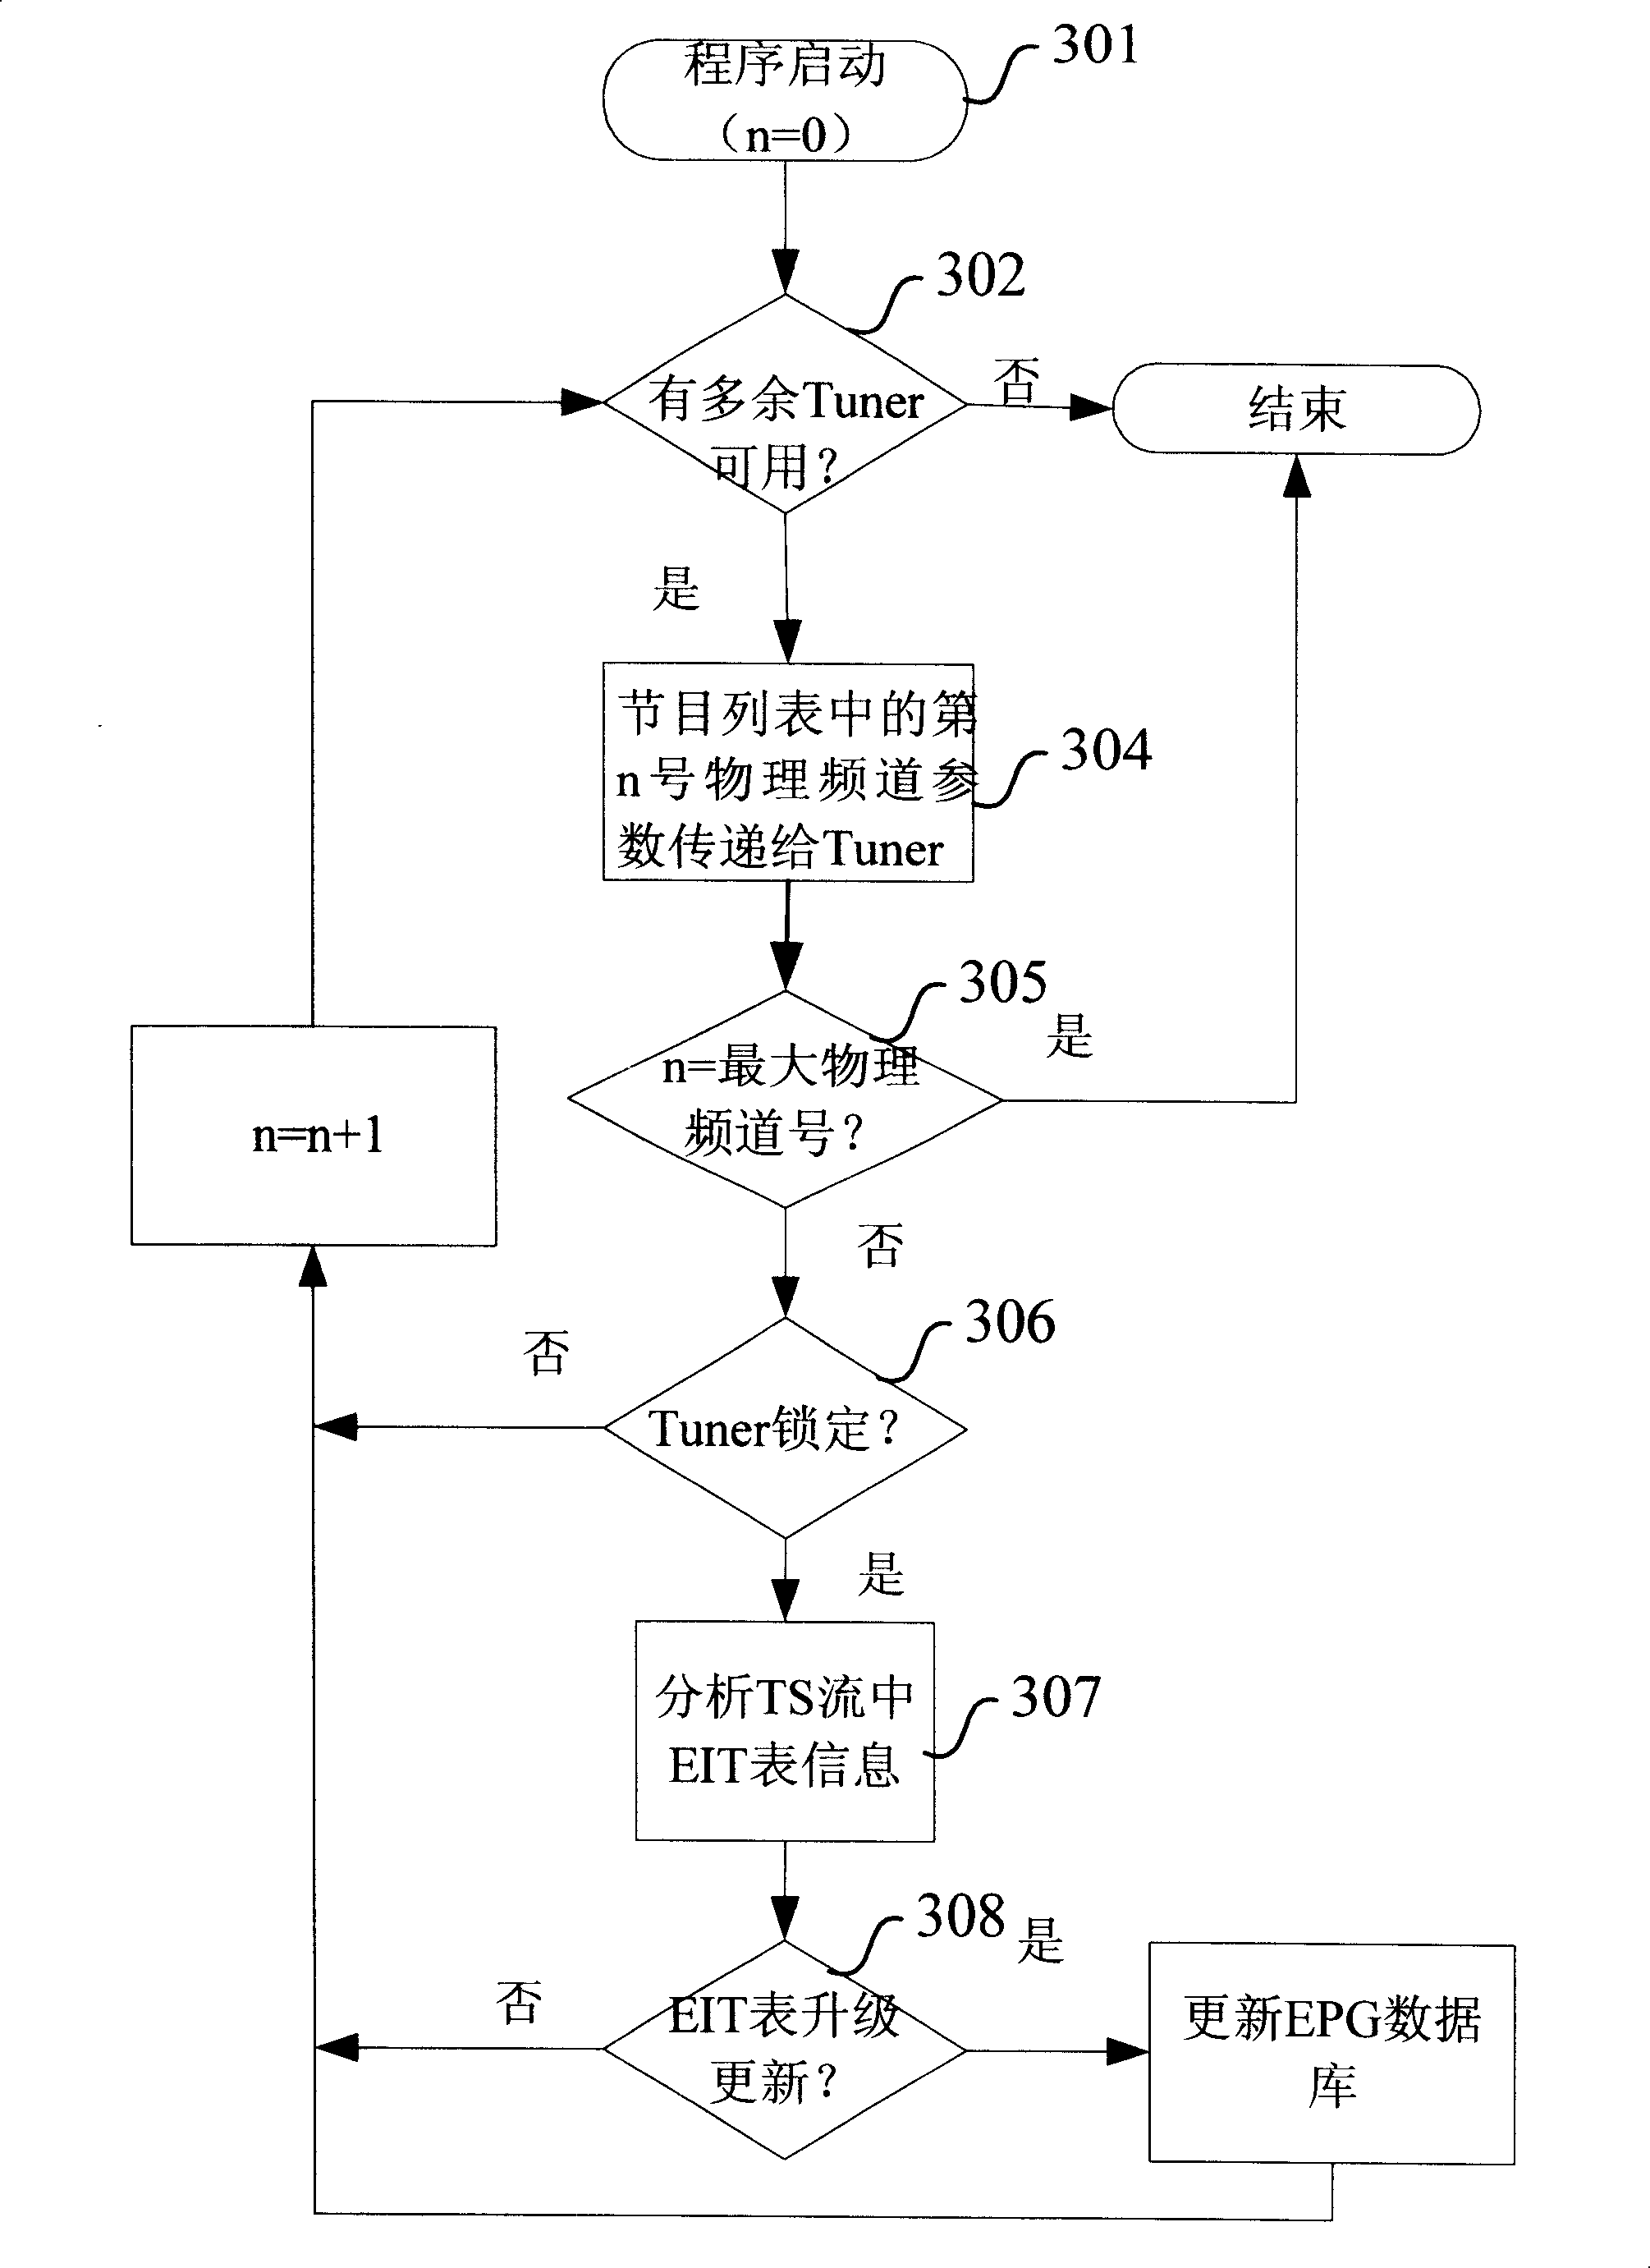 Method for implementing automatic refreshing of digital television electronic program guidebooks under multi tuner